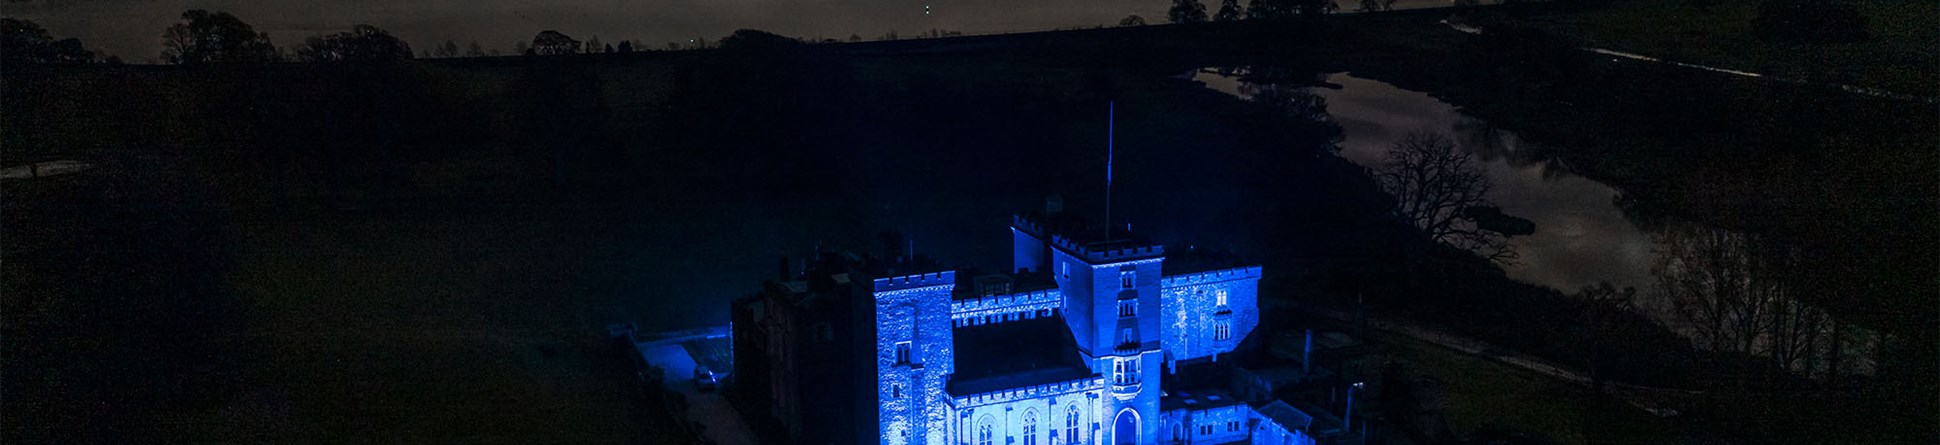 Night-time image showing Powderham Castle lit up blue for key workers against a cloudy sky and the lights of a town reflected in the river.